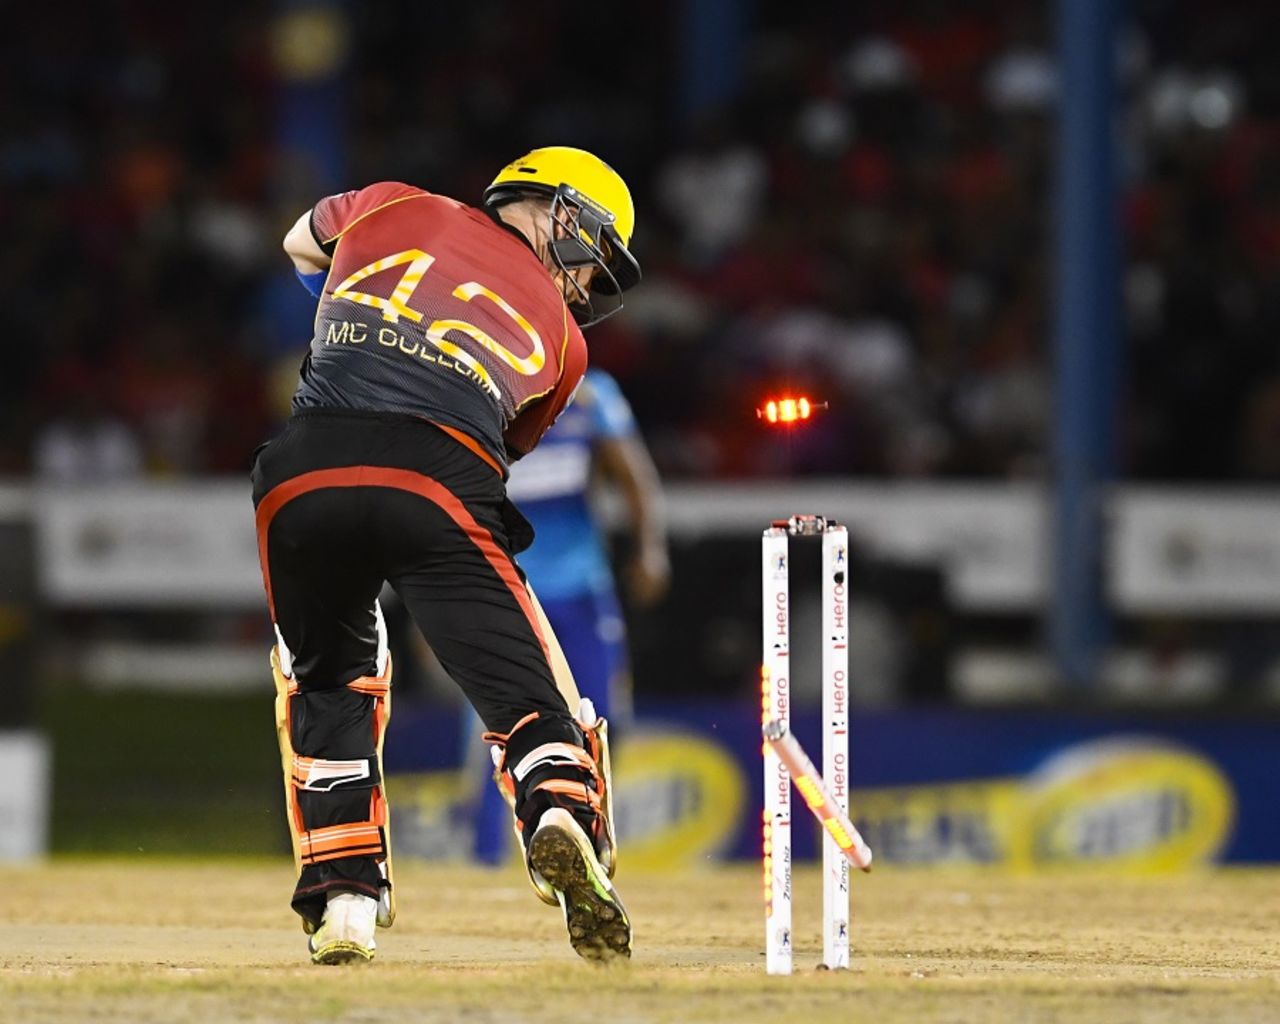 Brendon McCullum has his stumps taken out, Barbados Tridents v Trinbago Knight Riders, CPL 2017, Port of Spain, August 12, 2017